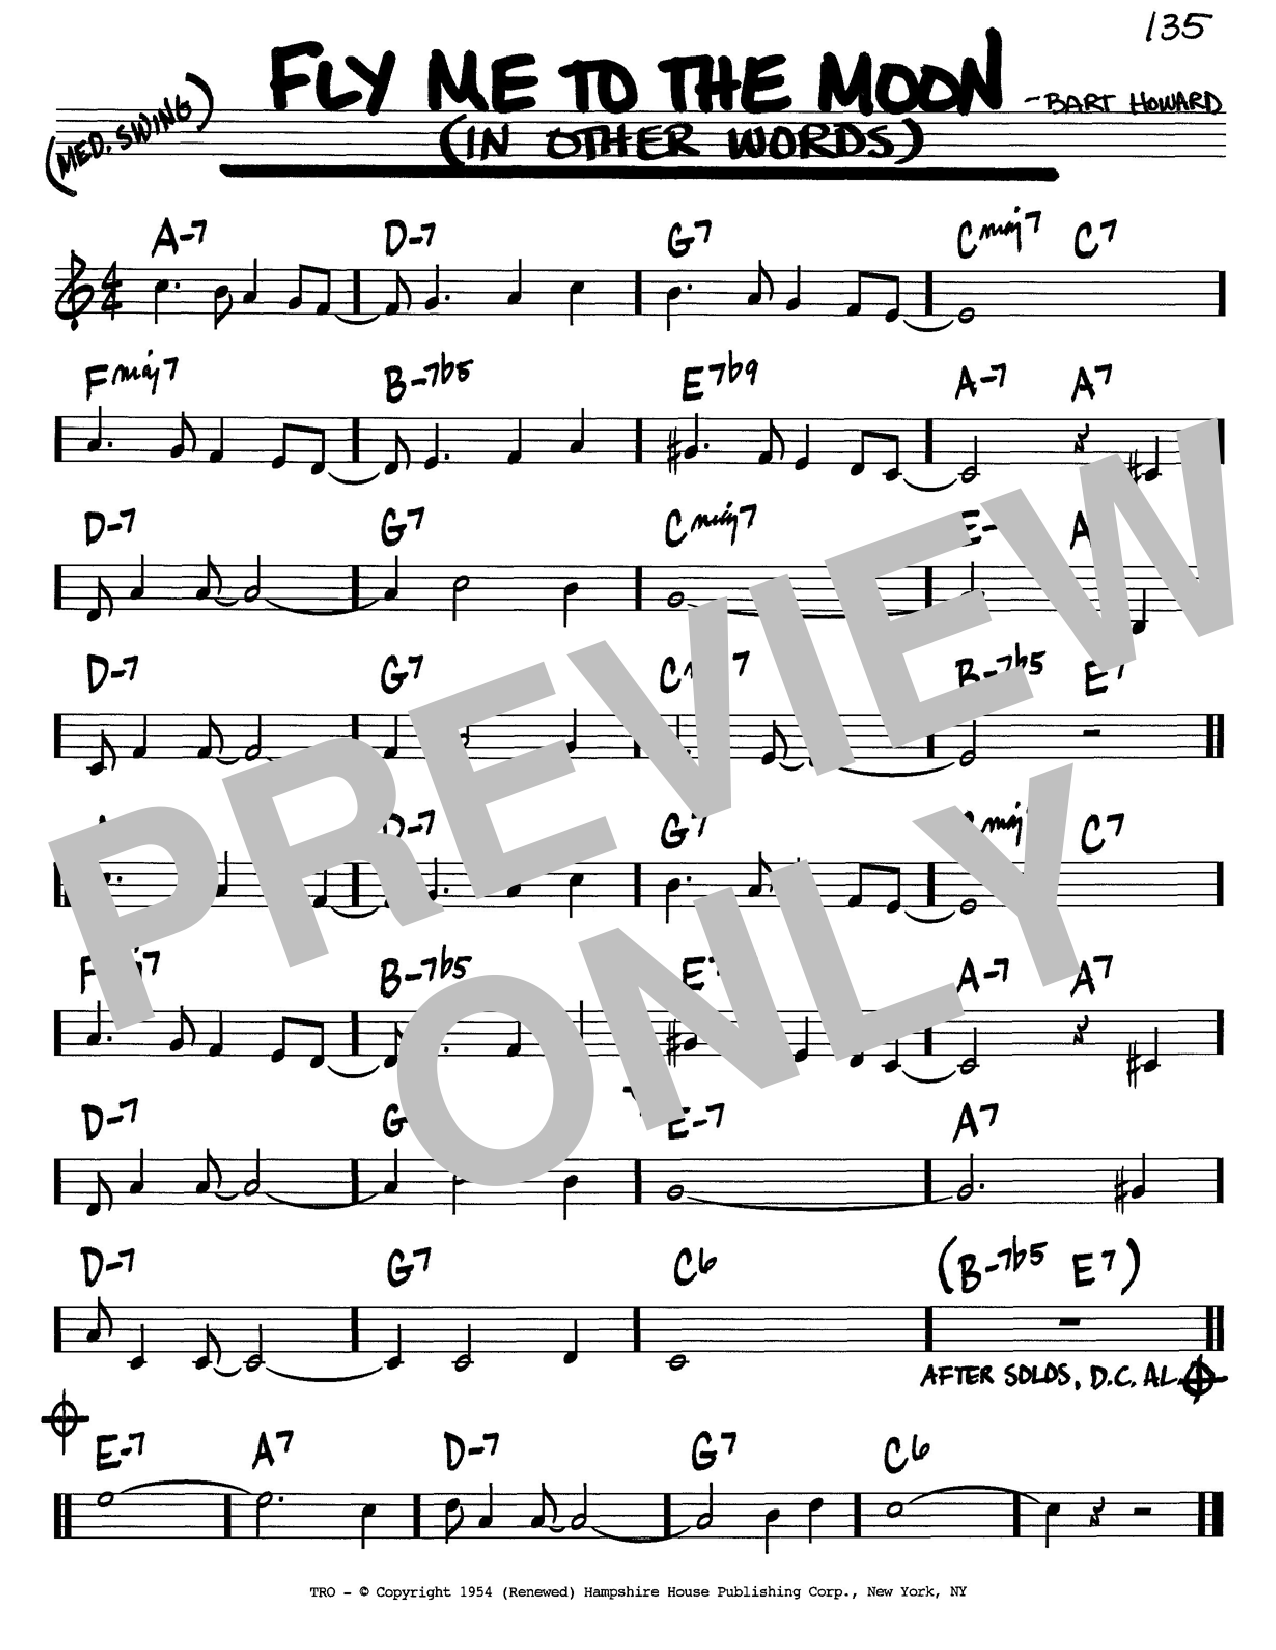 Fly Me To The Moon (In Other Words) sheet music by Frank Sinatra 